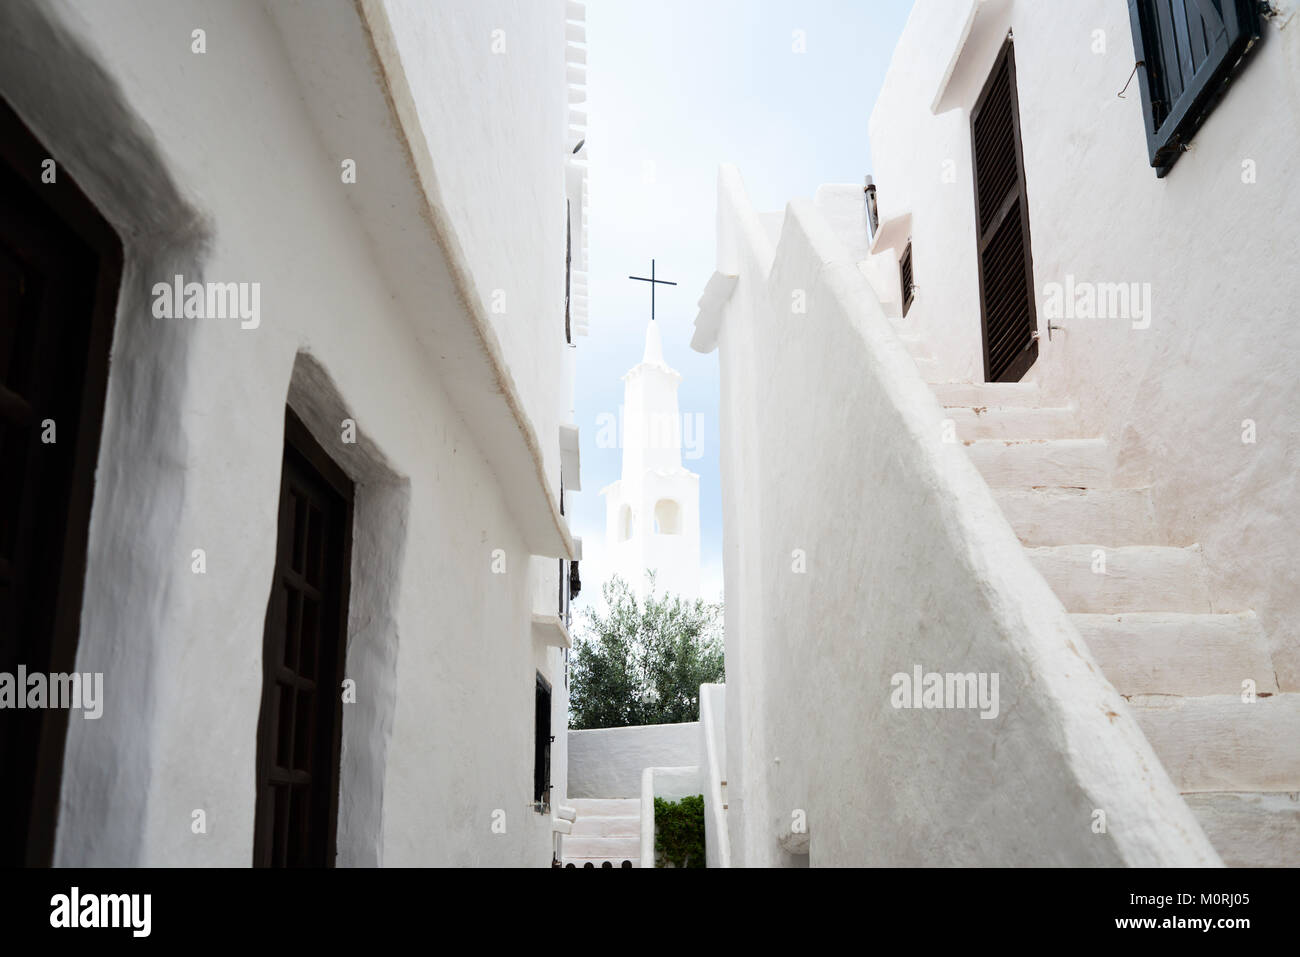 Church in the white traditional small village Binibequer Vell located in Menorca, Balearic Islands, Spain. Stock Photo